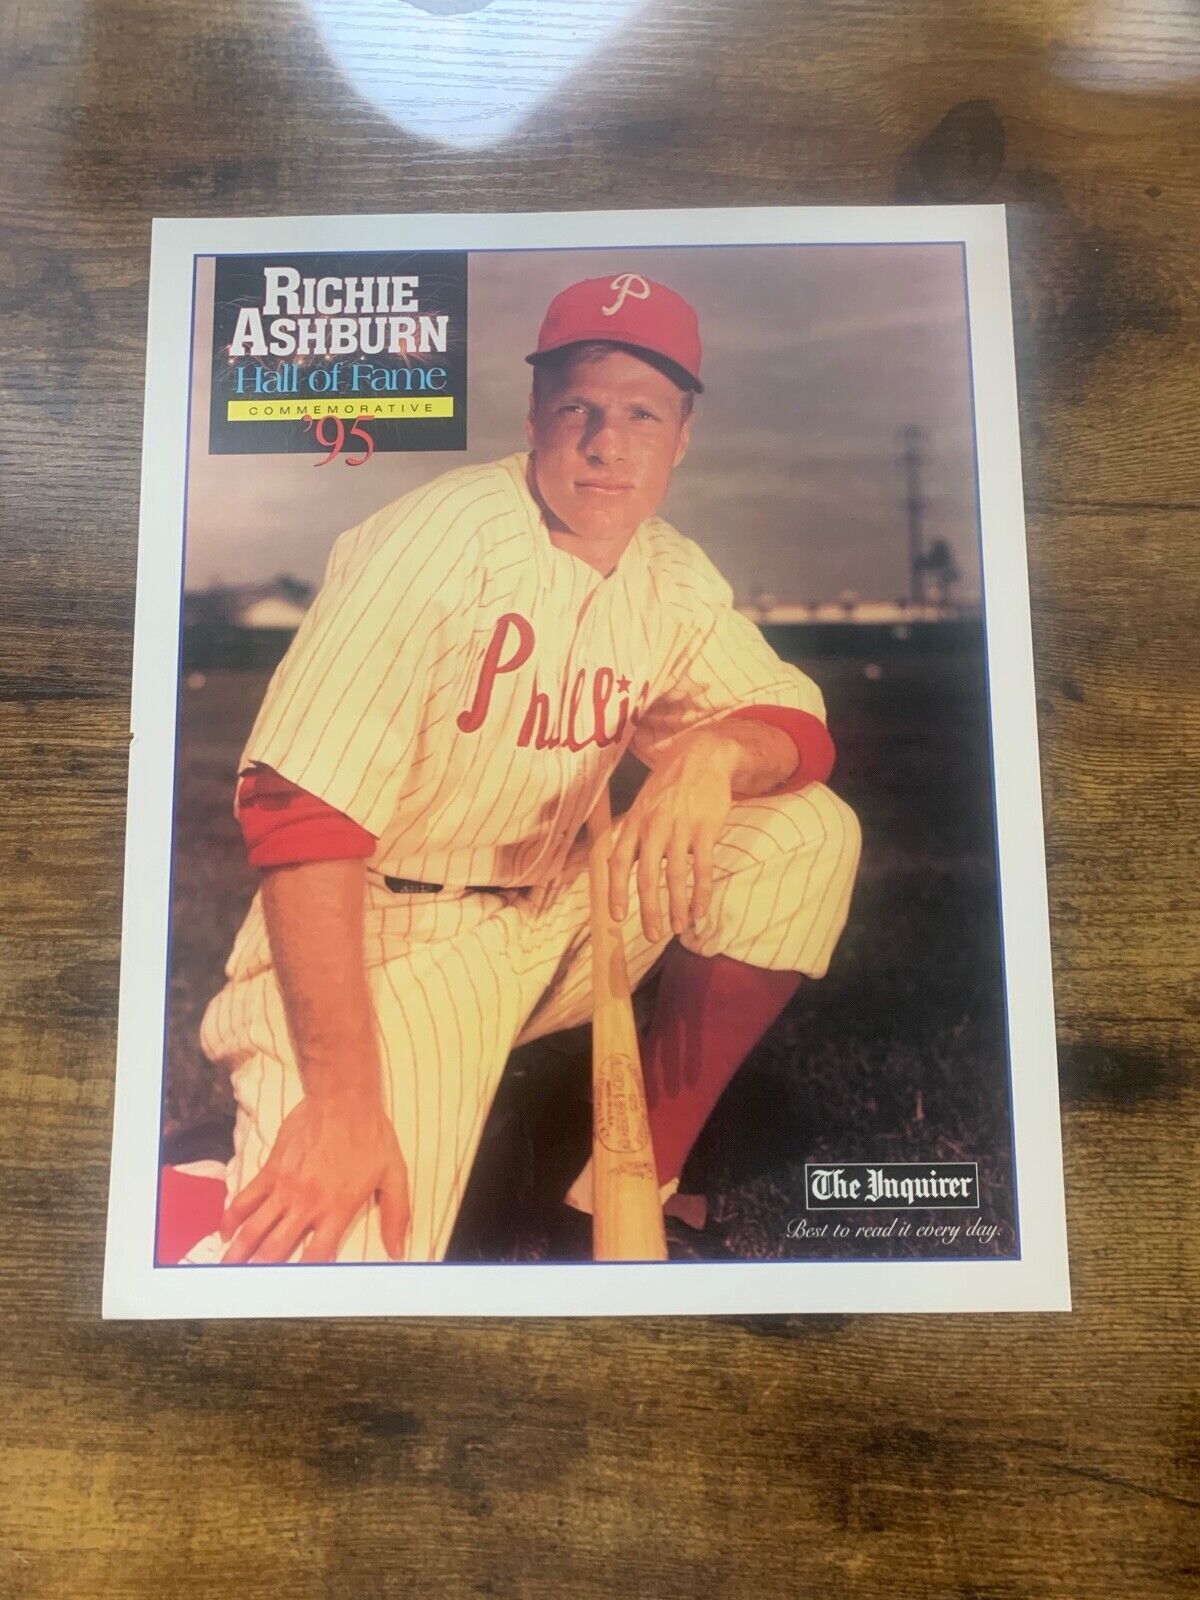 Richie Ashburn 1995 Hall of Fame 11x13 Philadelphia Phillies The Inquirer photo